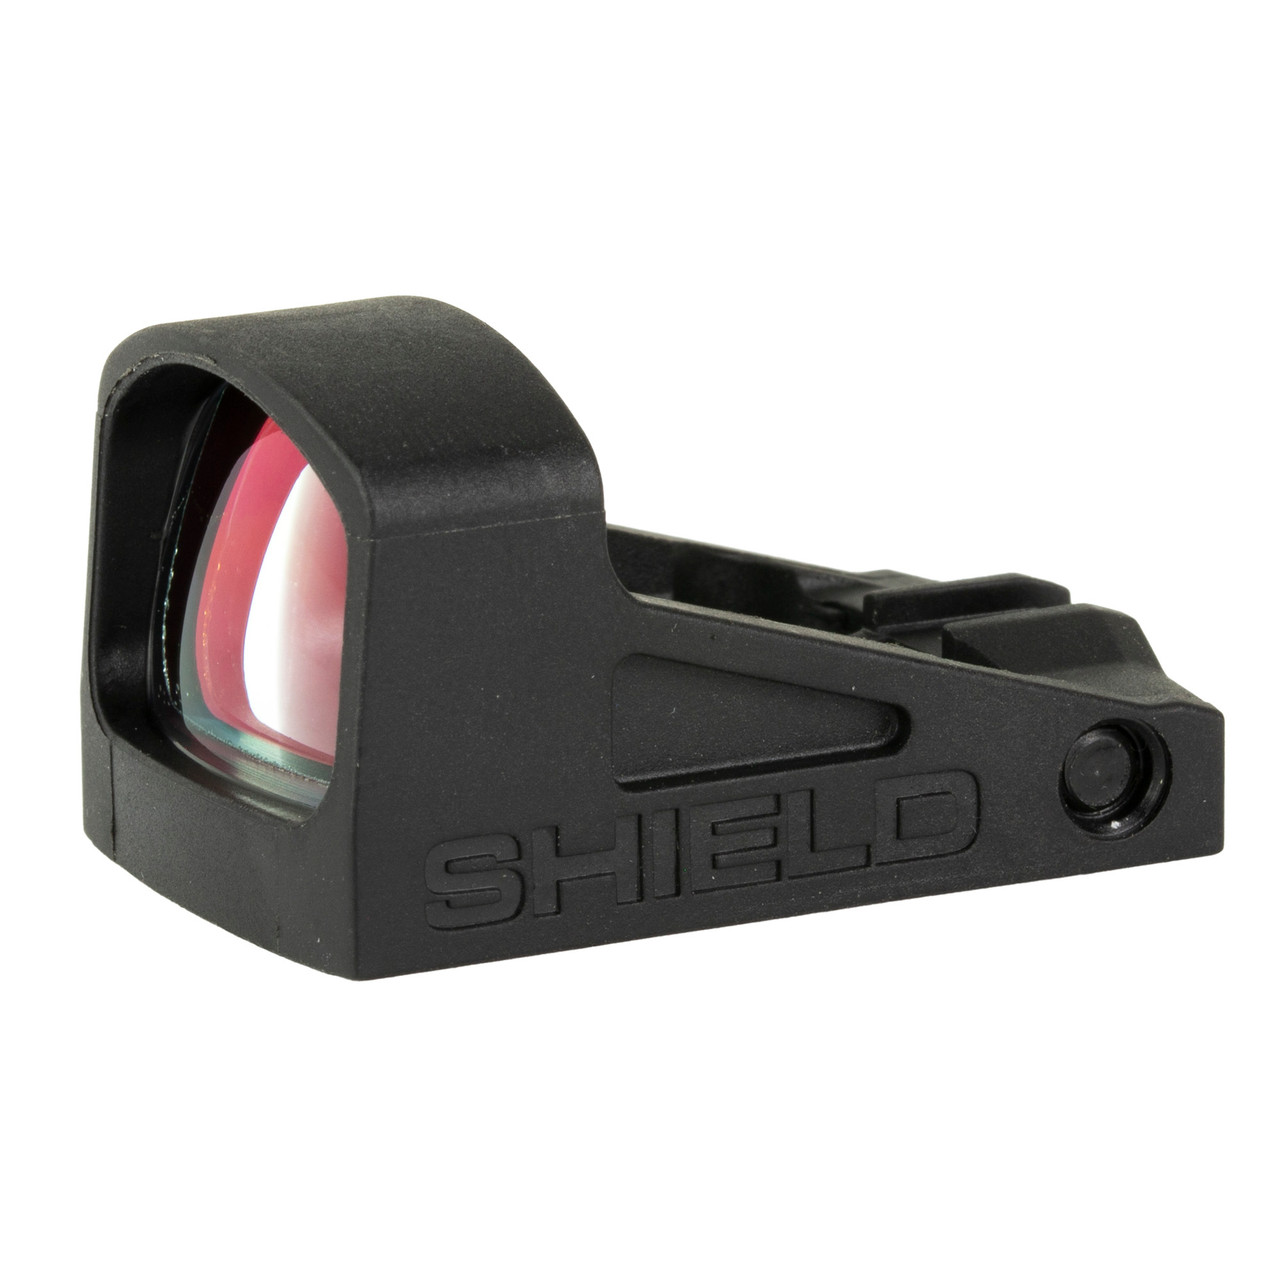 Shield Sights SMS2-4MOA-GLASS SHIELD Mini Sight 2.0, Glass Edition, Red Dot Sight, Non Magnified, Fits SMS Footprint, 4MOA Dot, Black